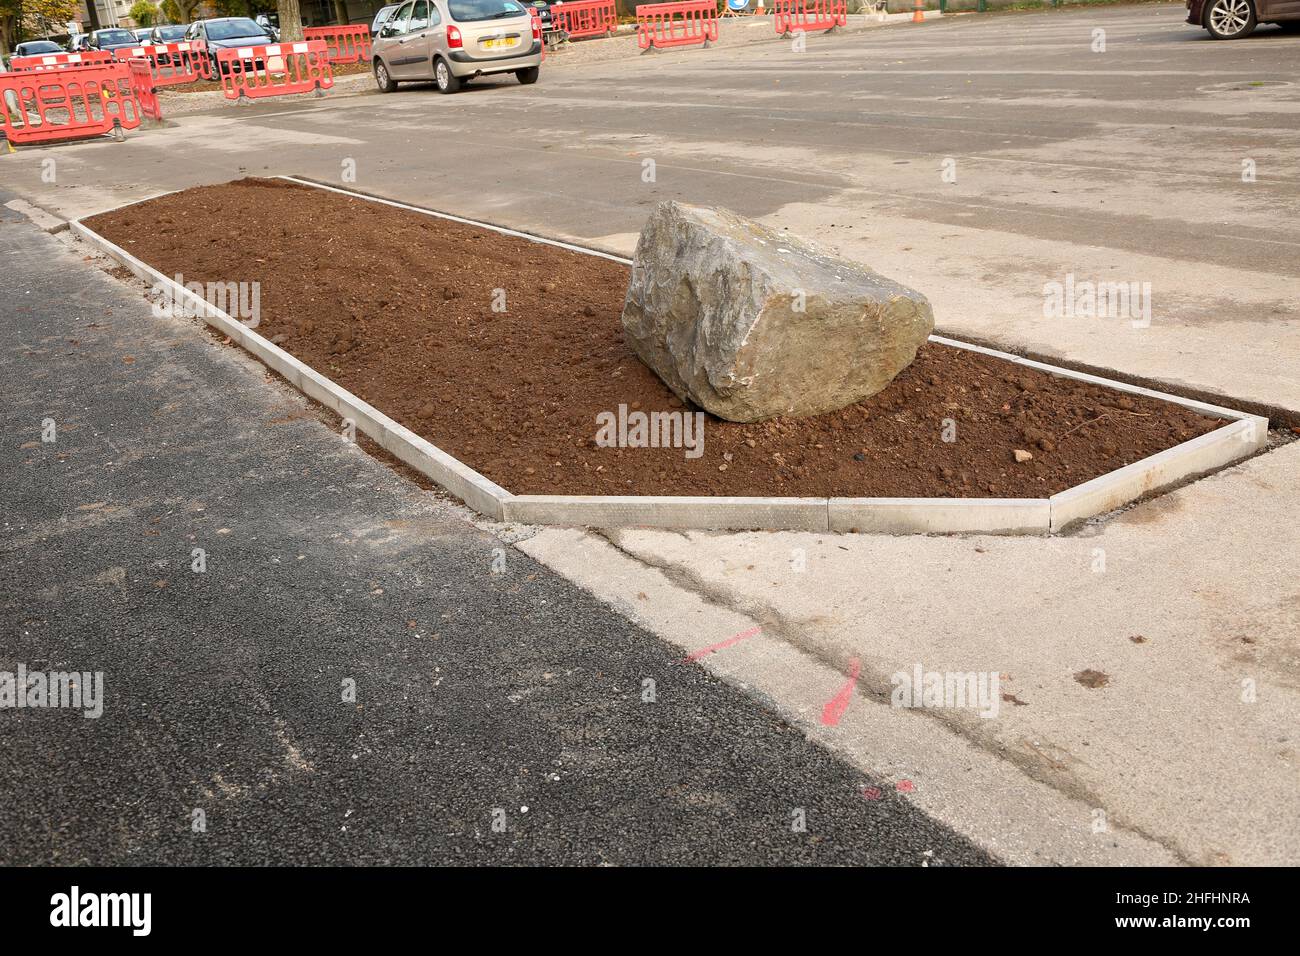 October 2015 - New raised flower bed in a car park Stock Photo